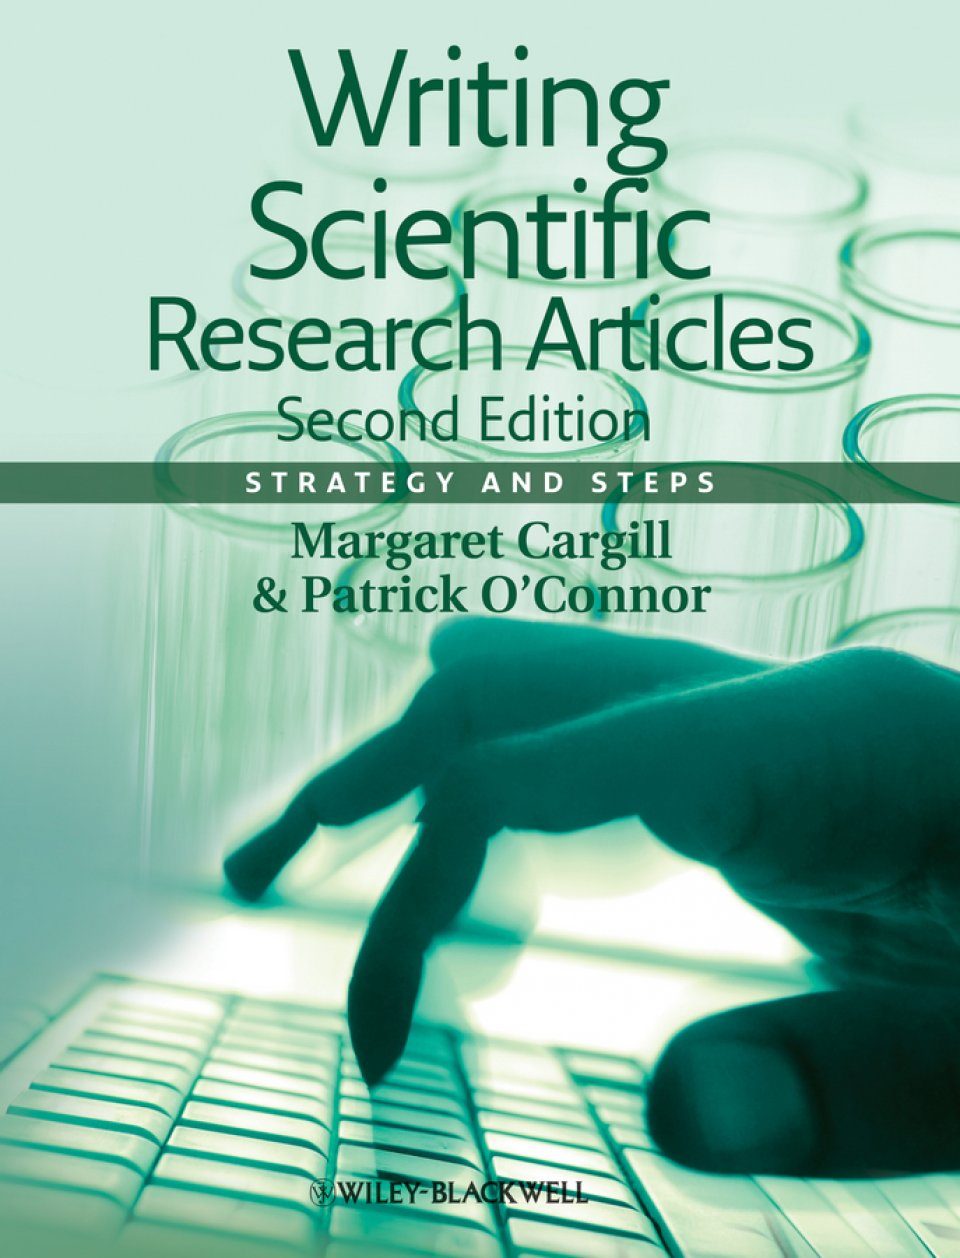 articles about scientific research